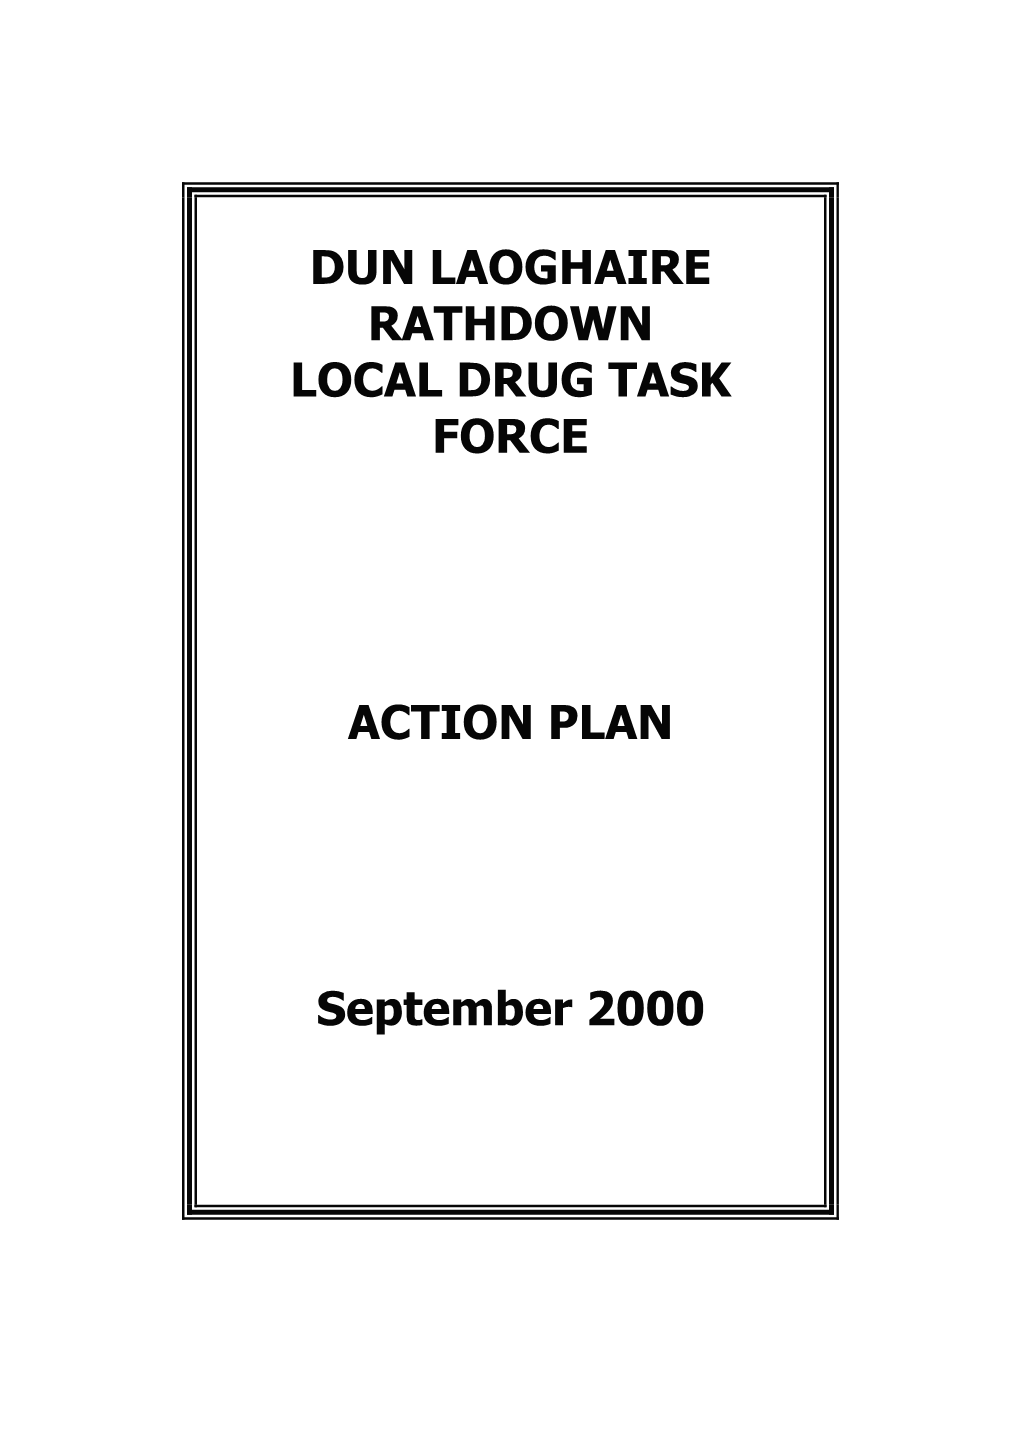 Dun Laoghaire Rathdown Local Drug Task Force